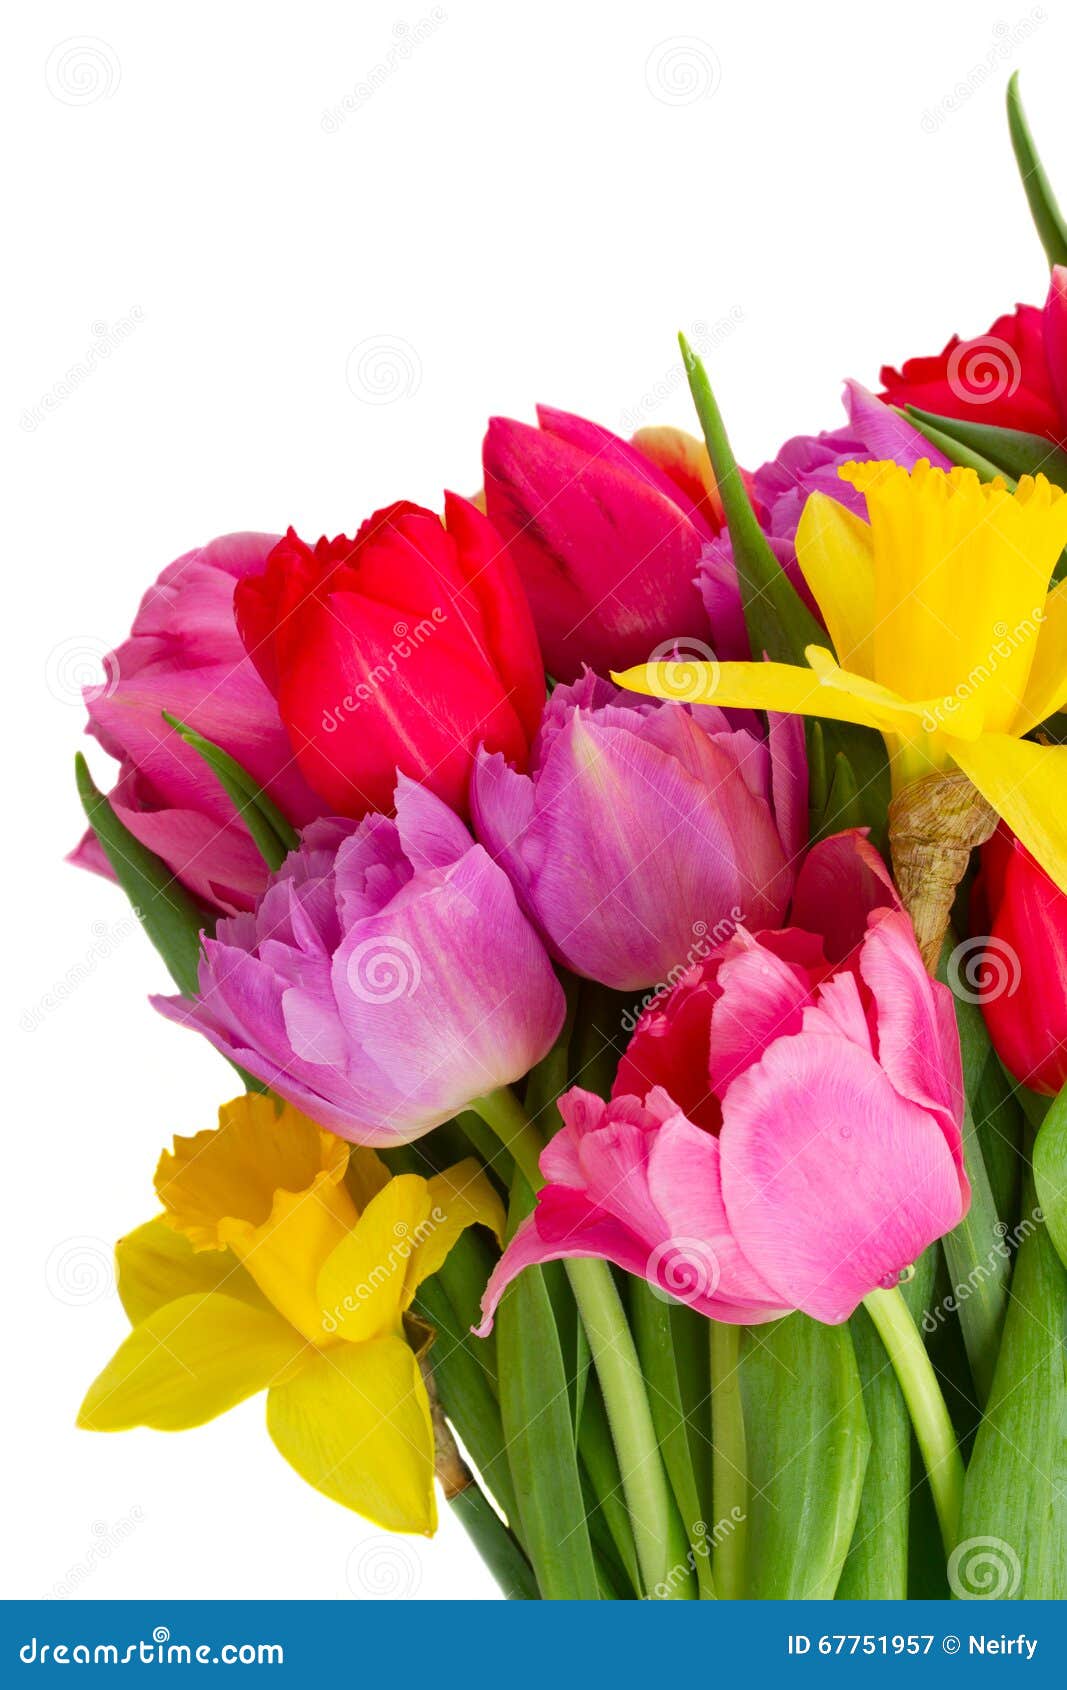 Bouquet Of Tulips And Daffodils Stock Image - Image of blossom, many ...